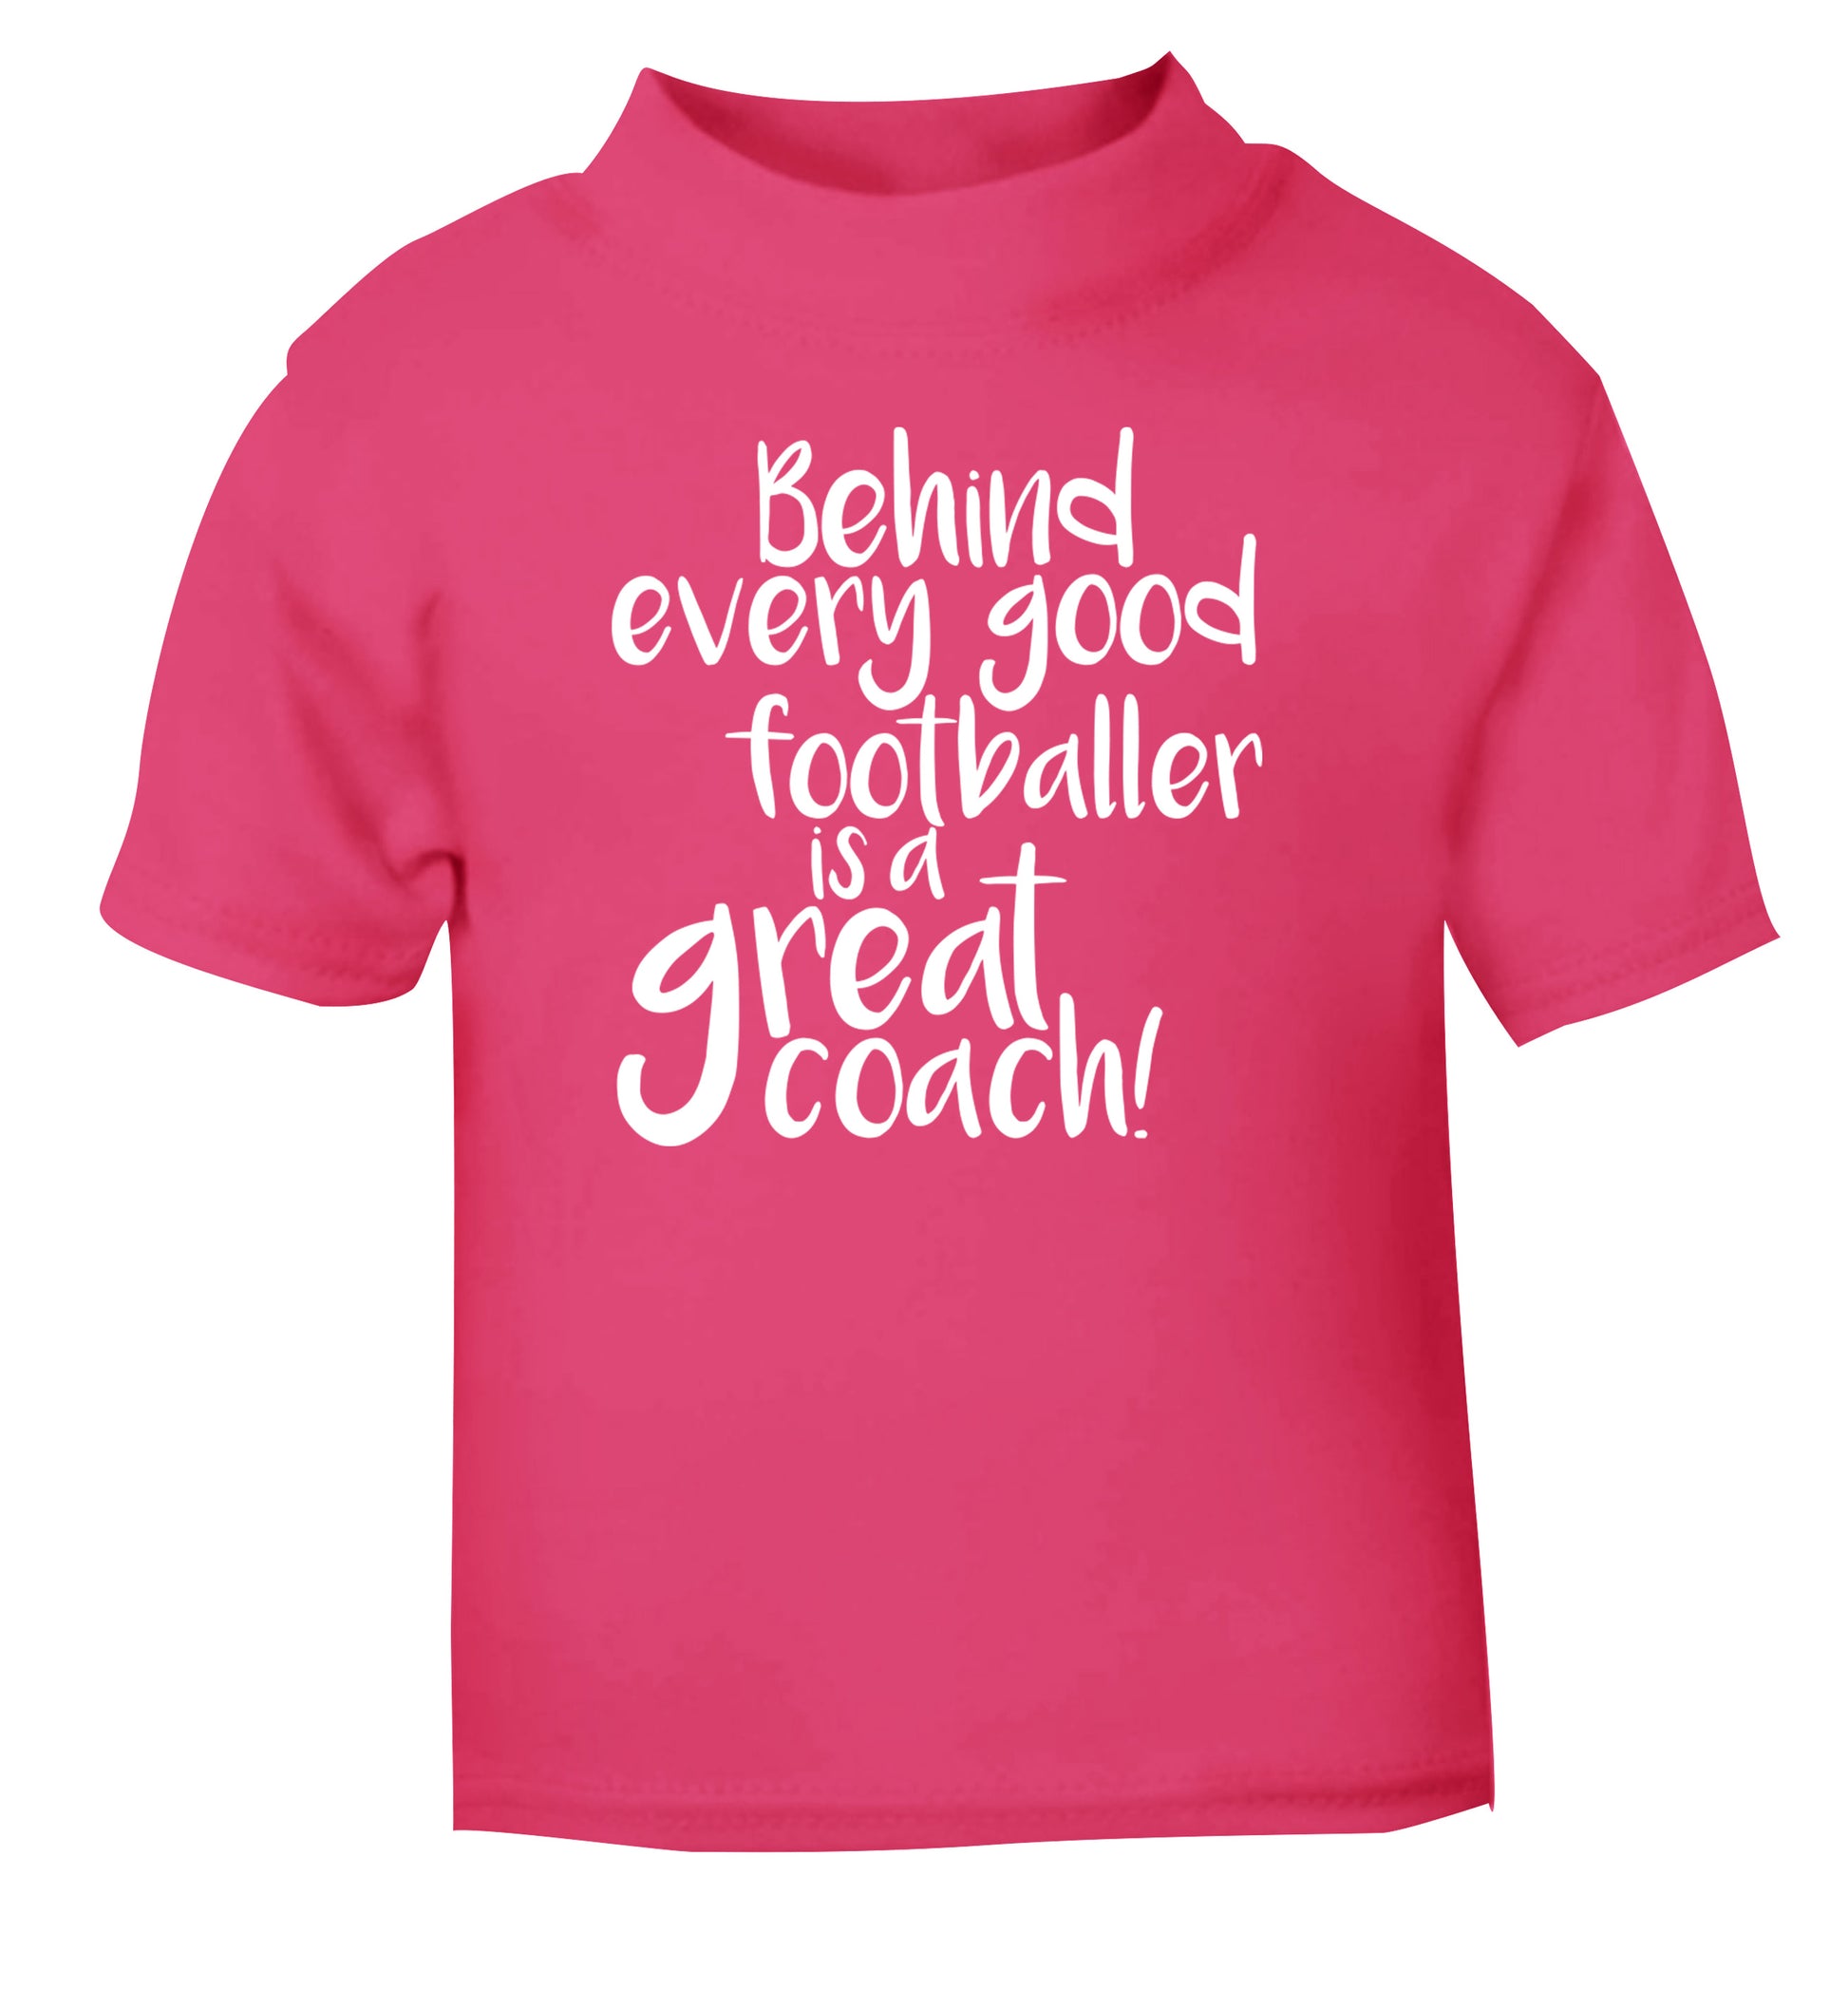 Behind every good footballer is a great coach! pink Baby Toddler Tshirt 2 Years